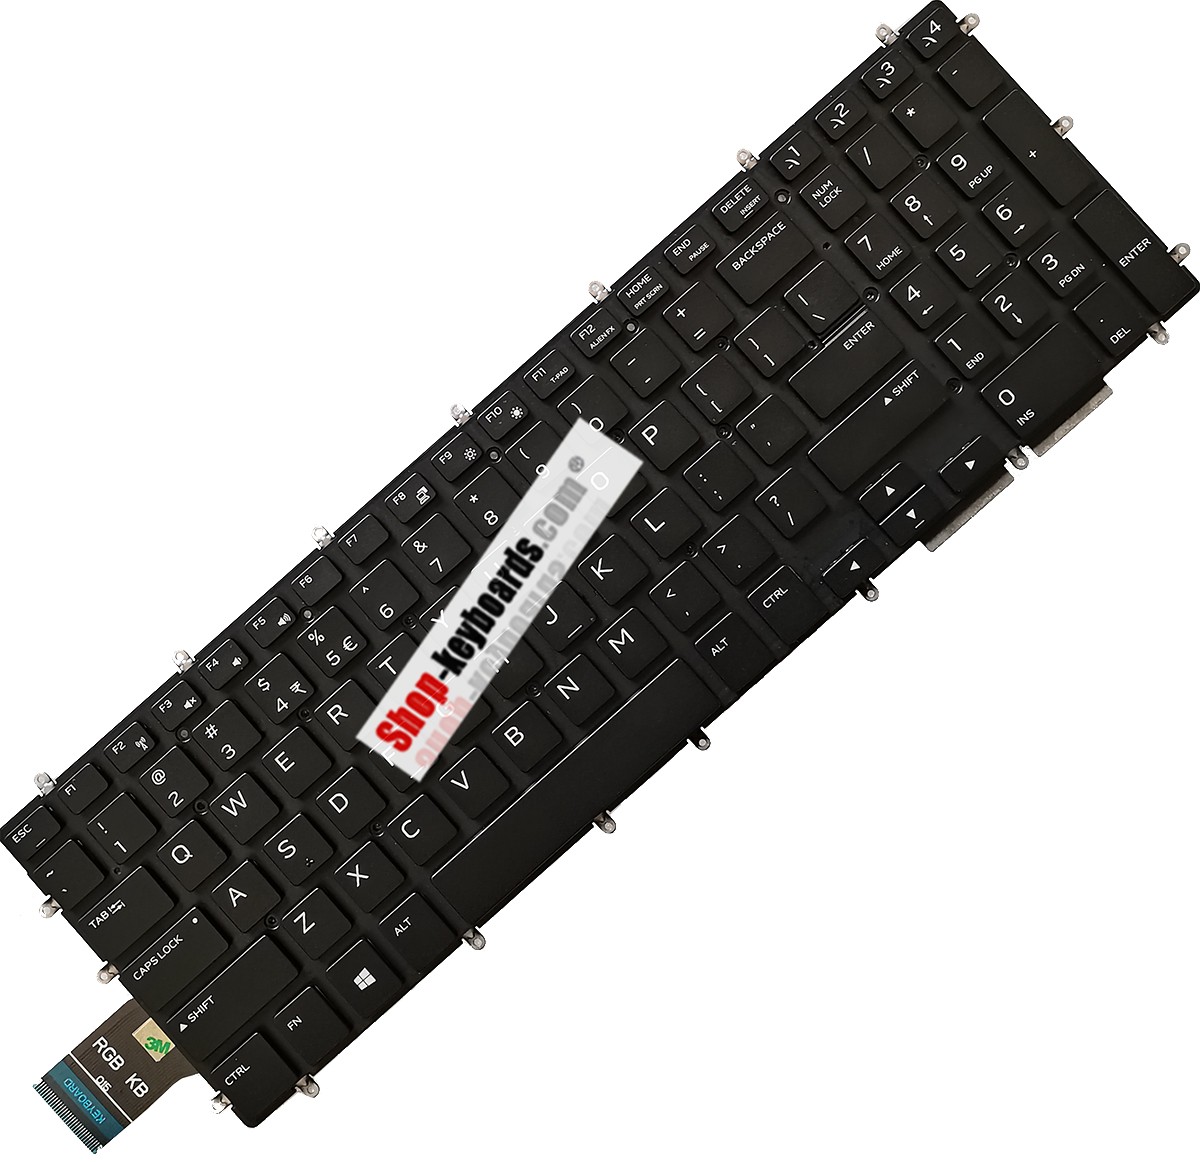 Dell 0KN4-0H1SP16 Keyboard replacement